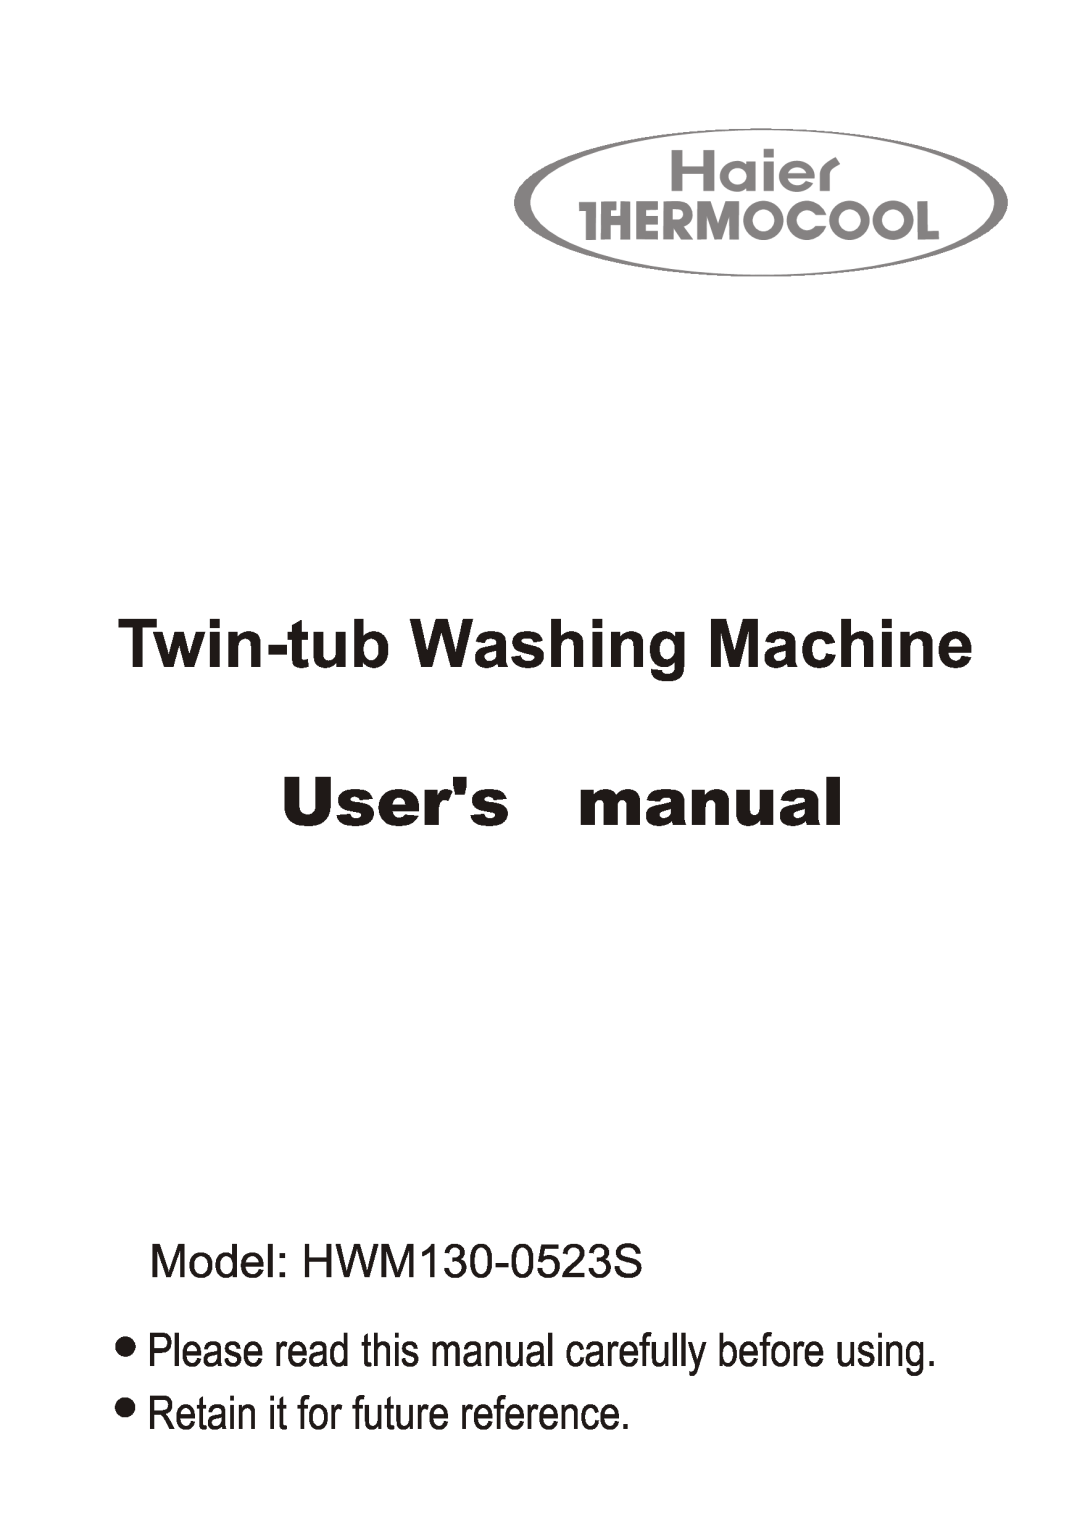 Haier HWM130-0523S user manual Twin-tub Washing Machine Users manual, Retain it for future reference 